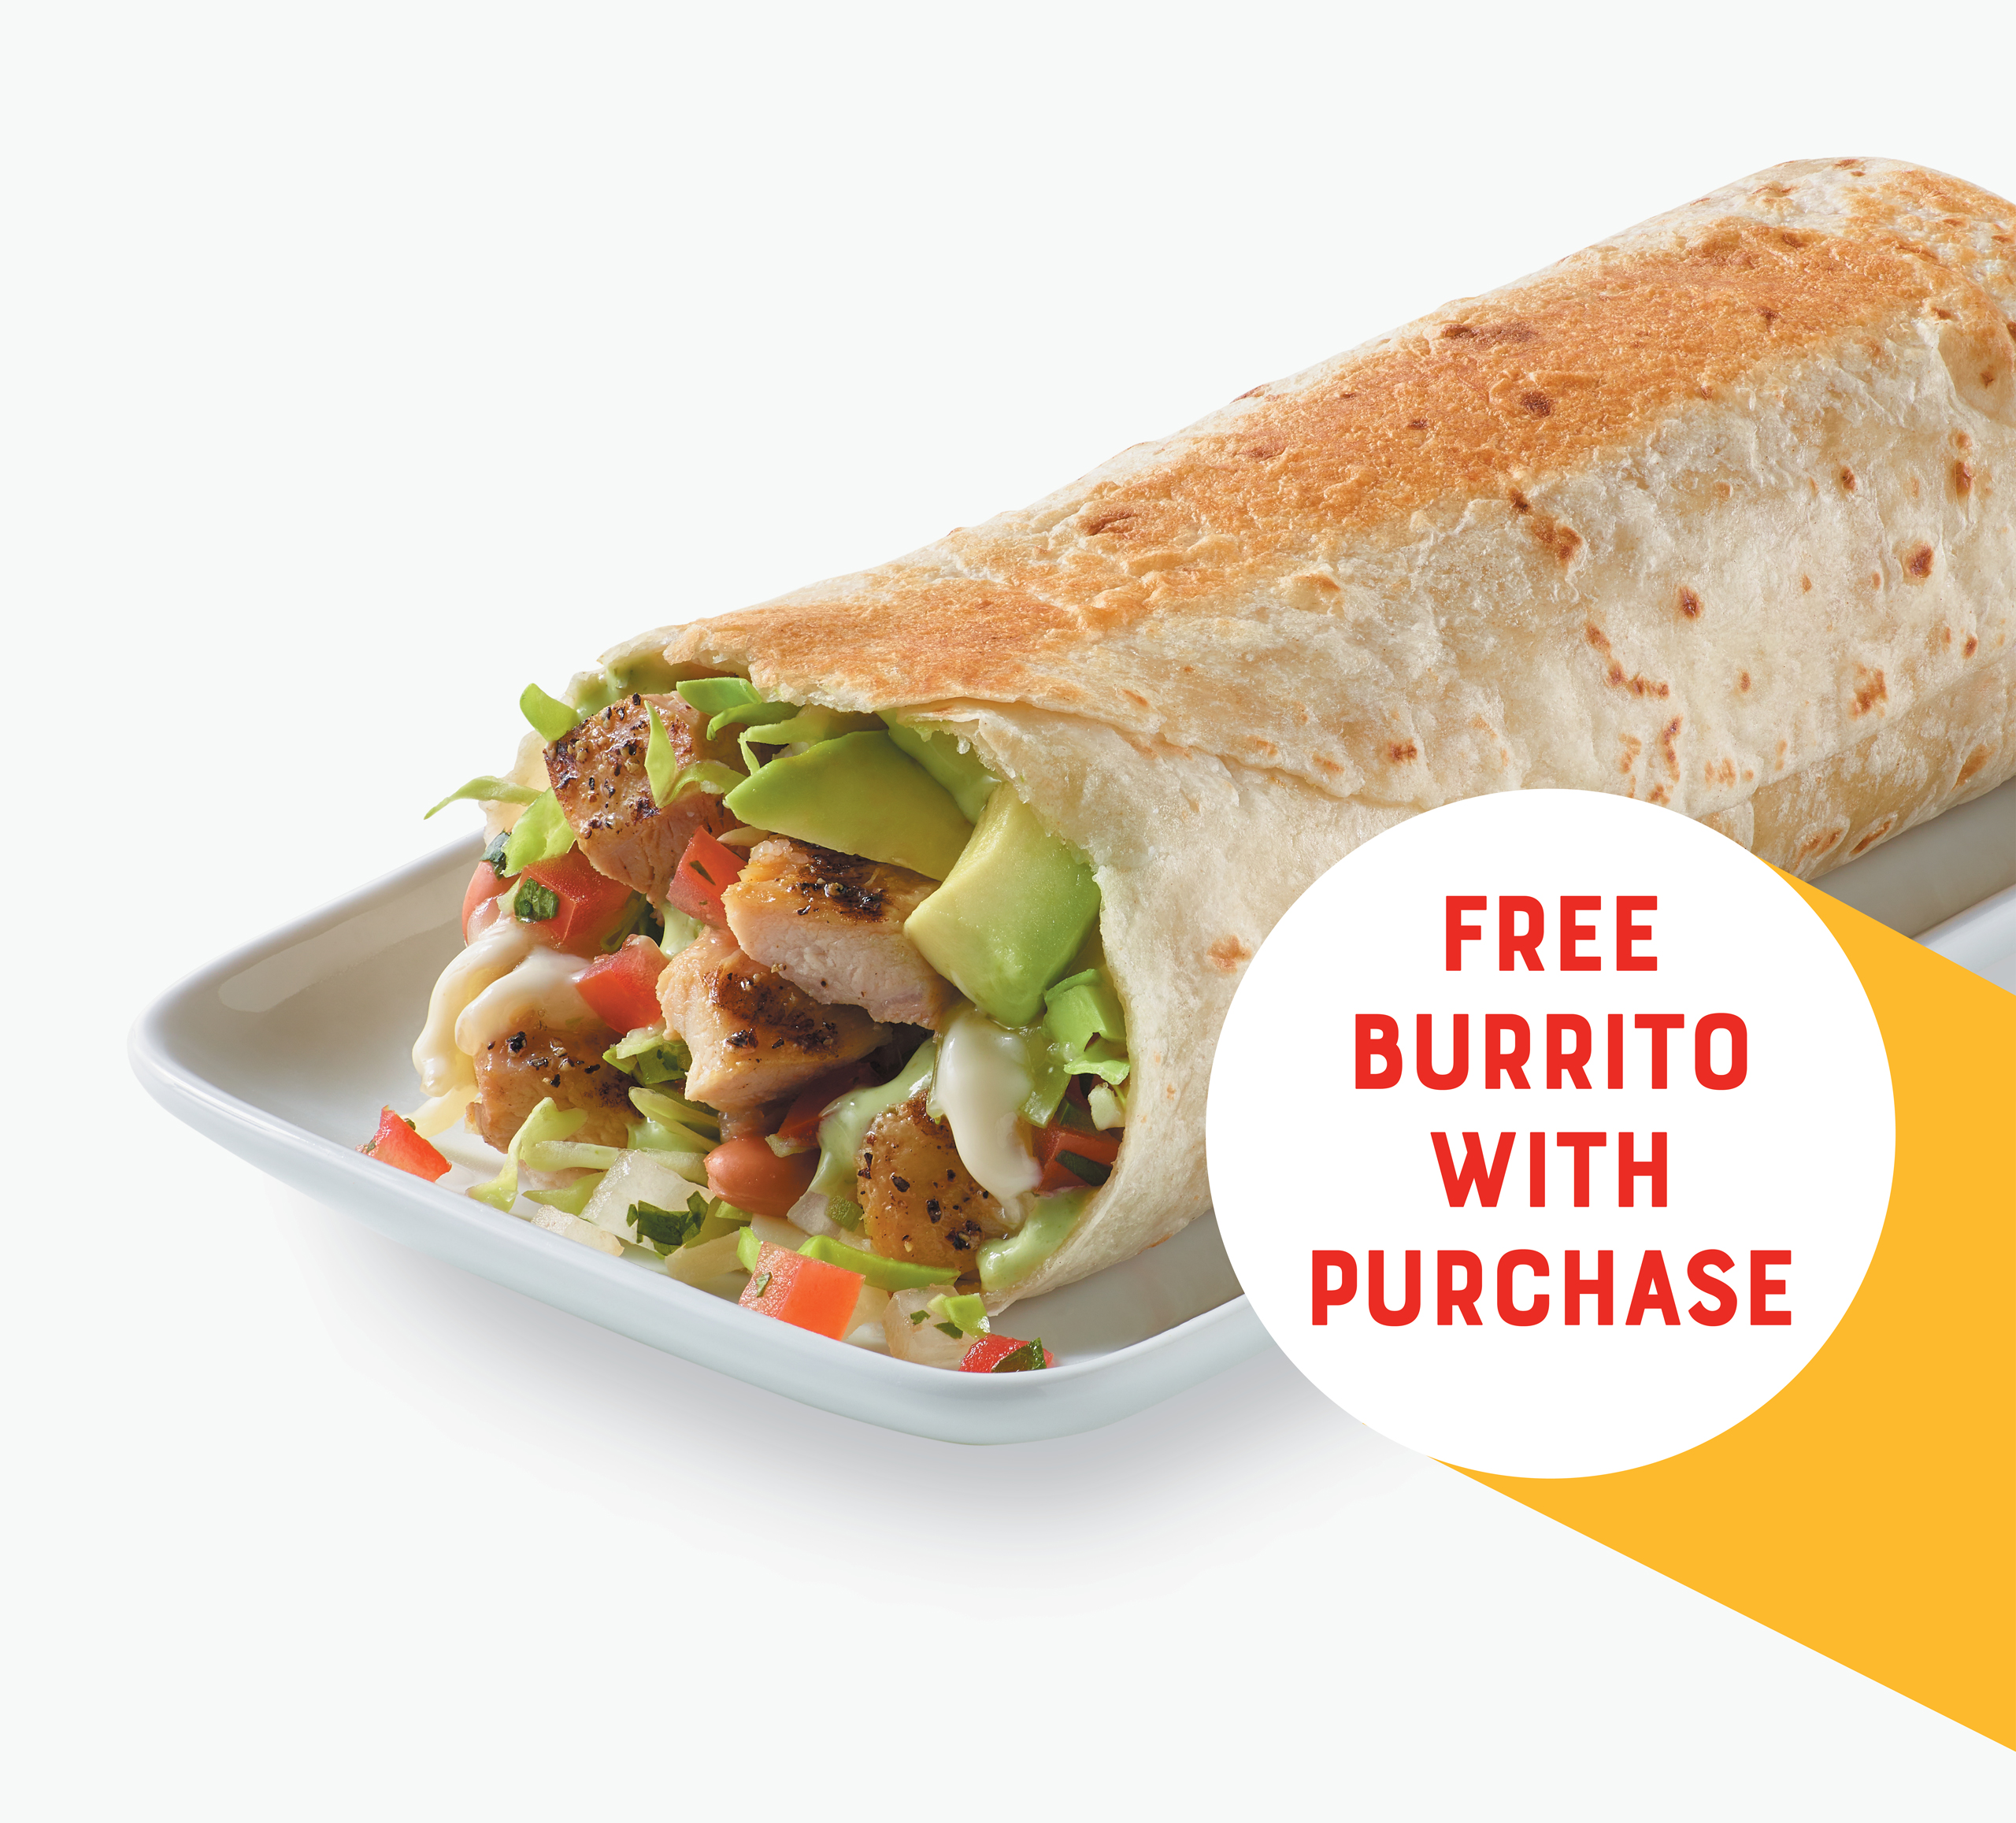 Free burrito with purchase